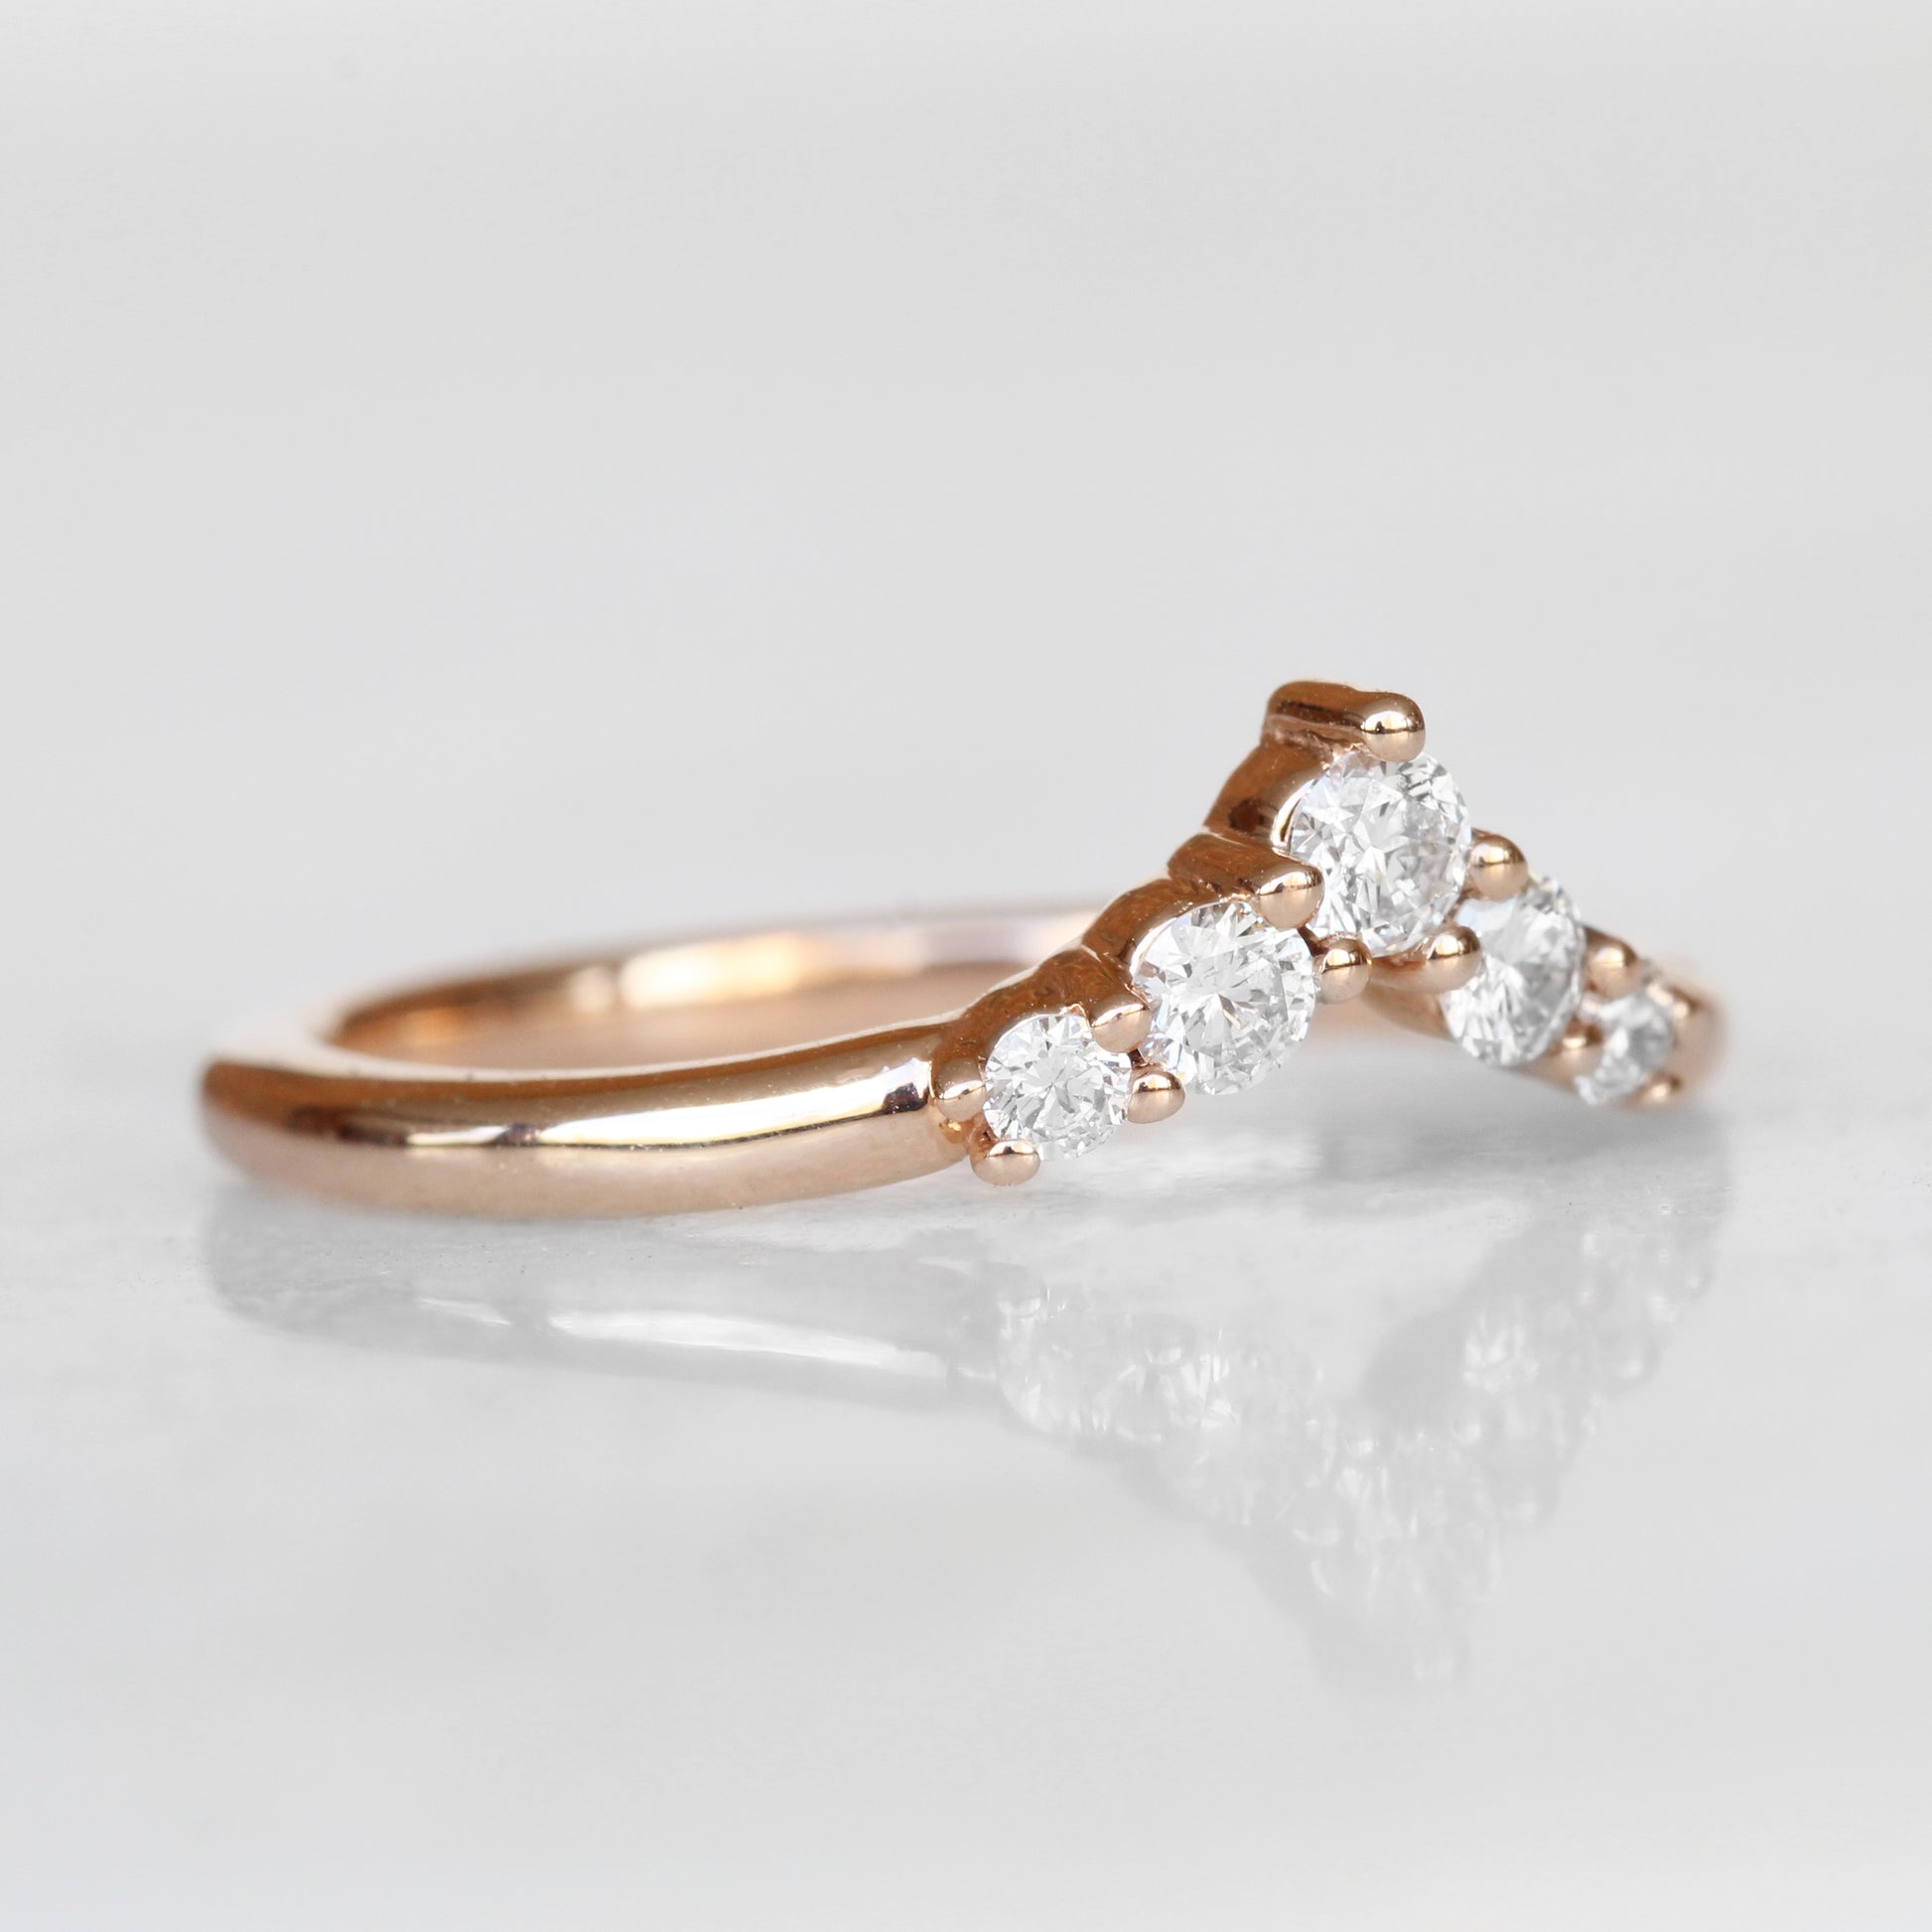 Rhiannon White Diamond Band - Contour Point V Shape Diamond Band - Gold of choice - Midwinter Co. Alternative Bridal Rings and Modern Fine Jewelry